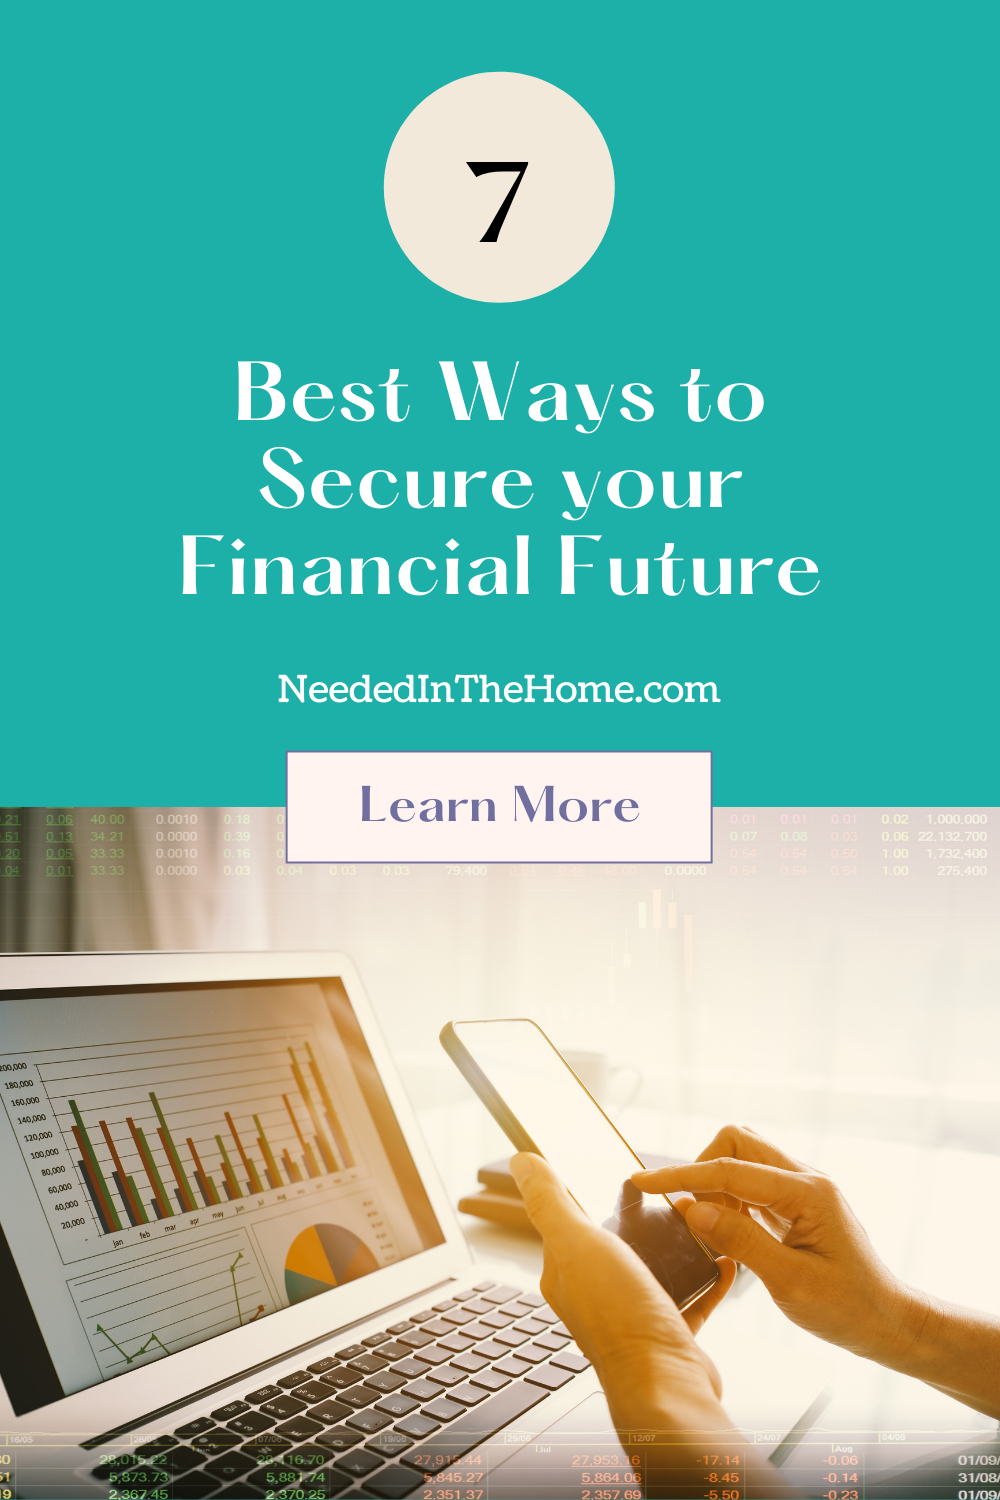 pinterest-pin-description 7 best ways to secure your financial future neededinthehome learn more button hands smartphone laptop financial spreadsheet on screen